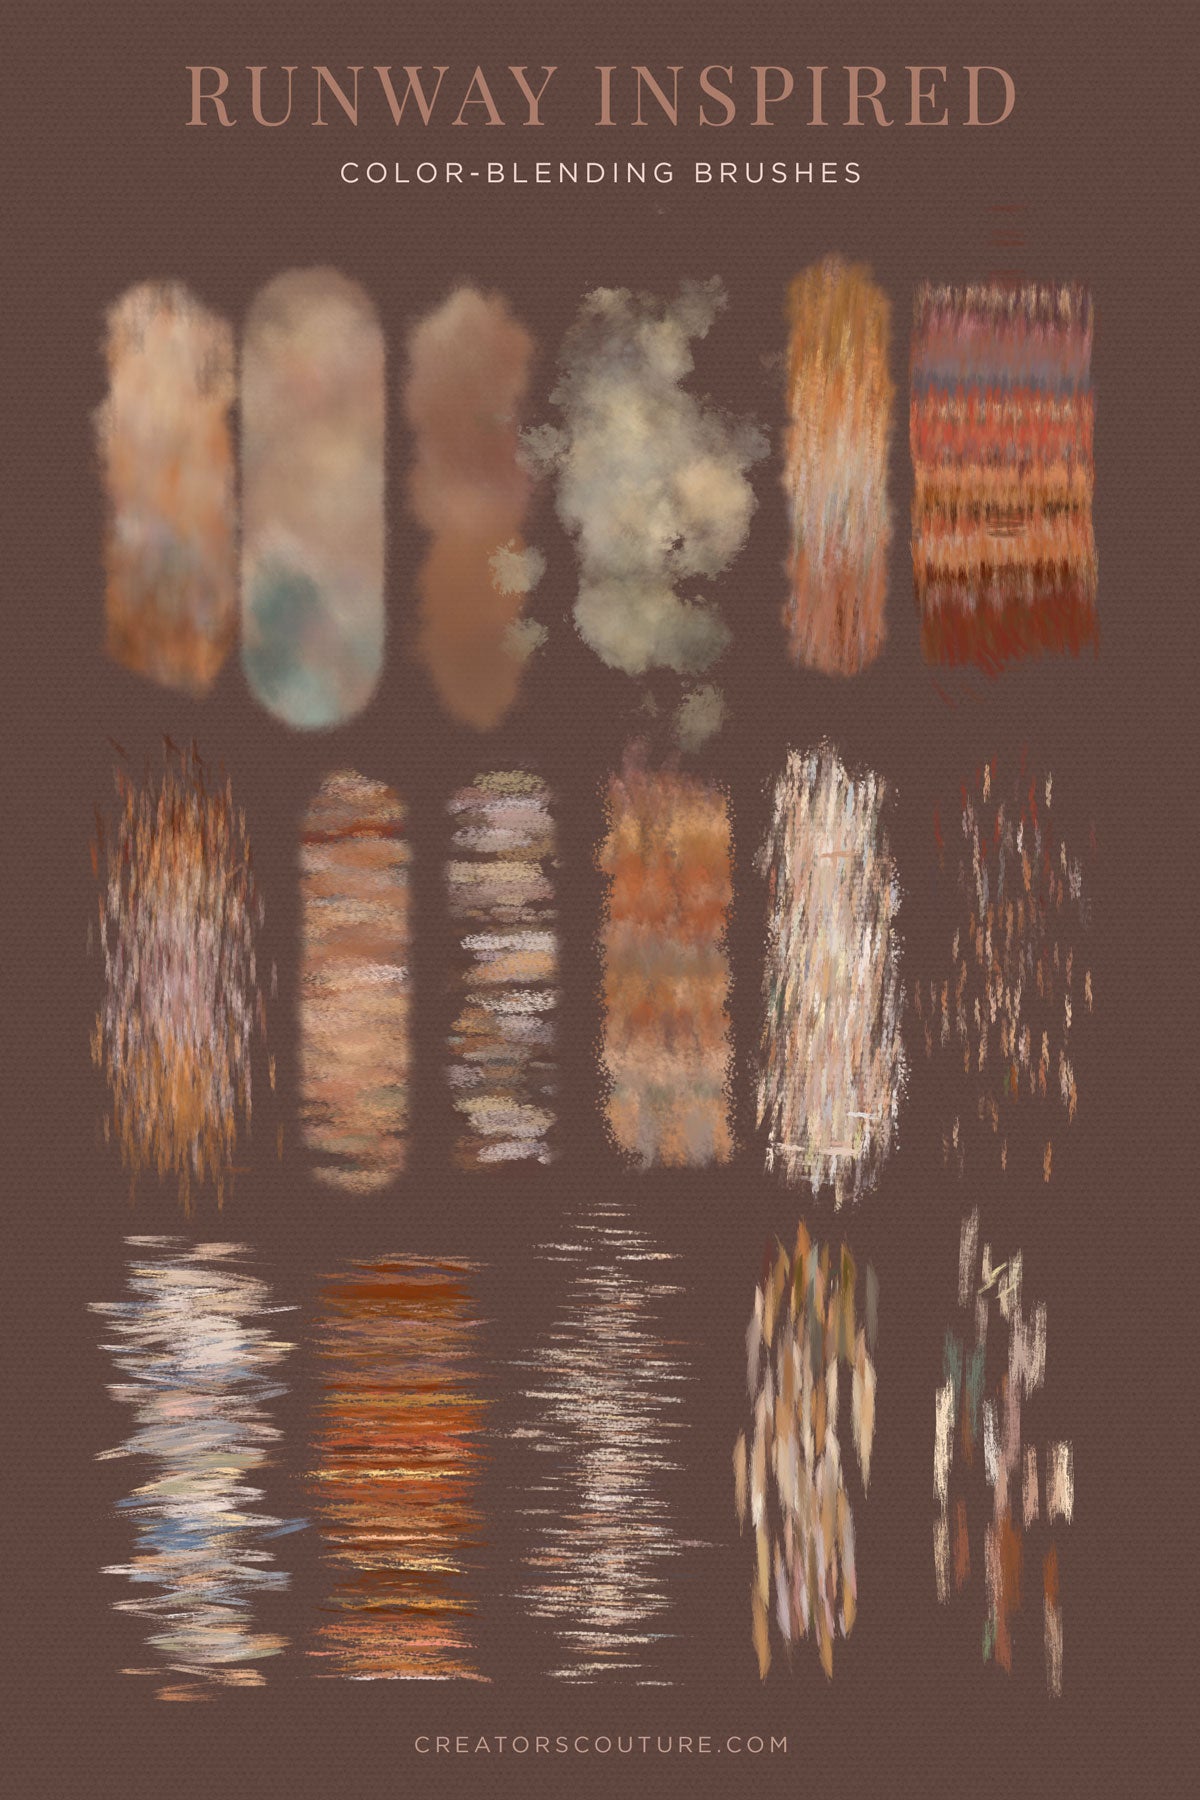 Fabric, Fiber, and Textile inspired Photoshop brushes